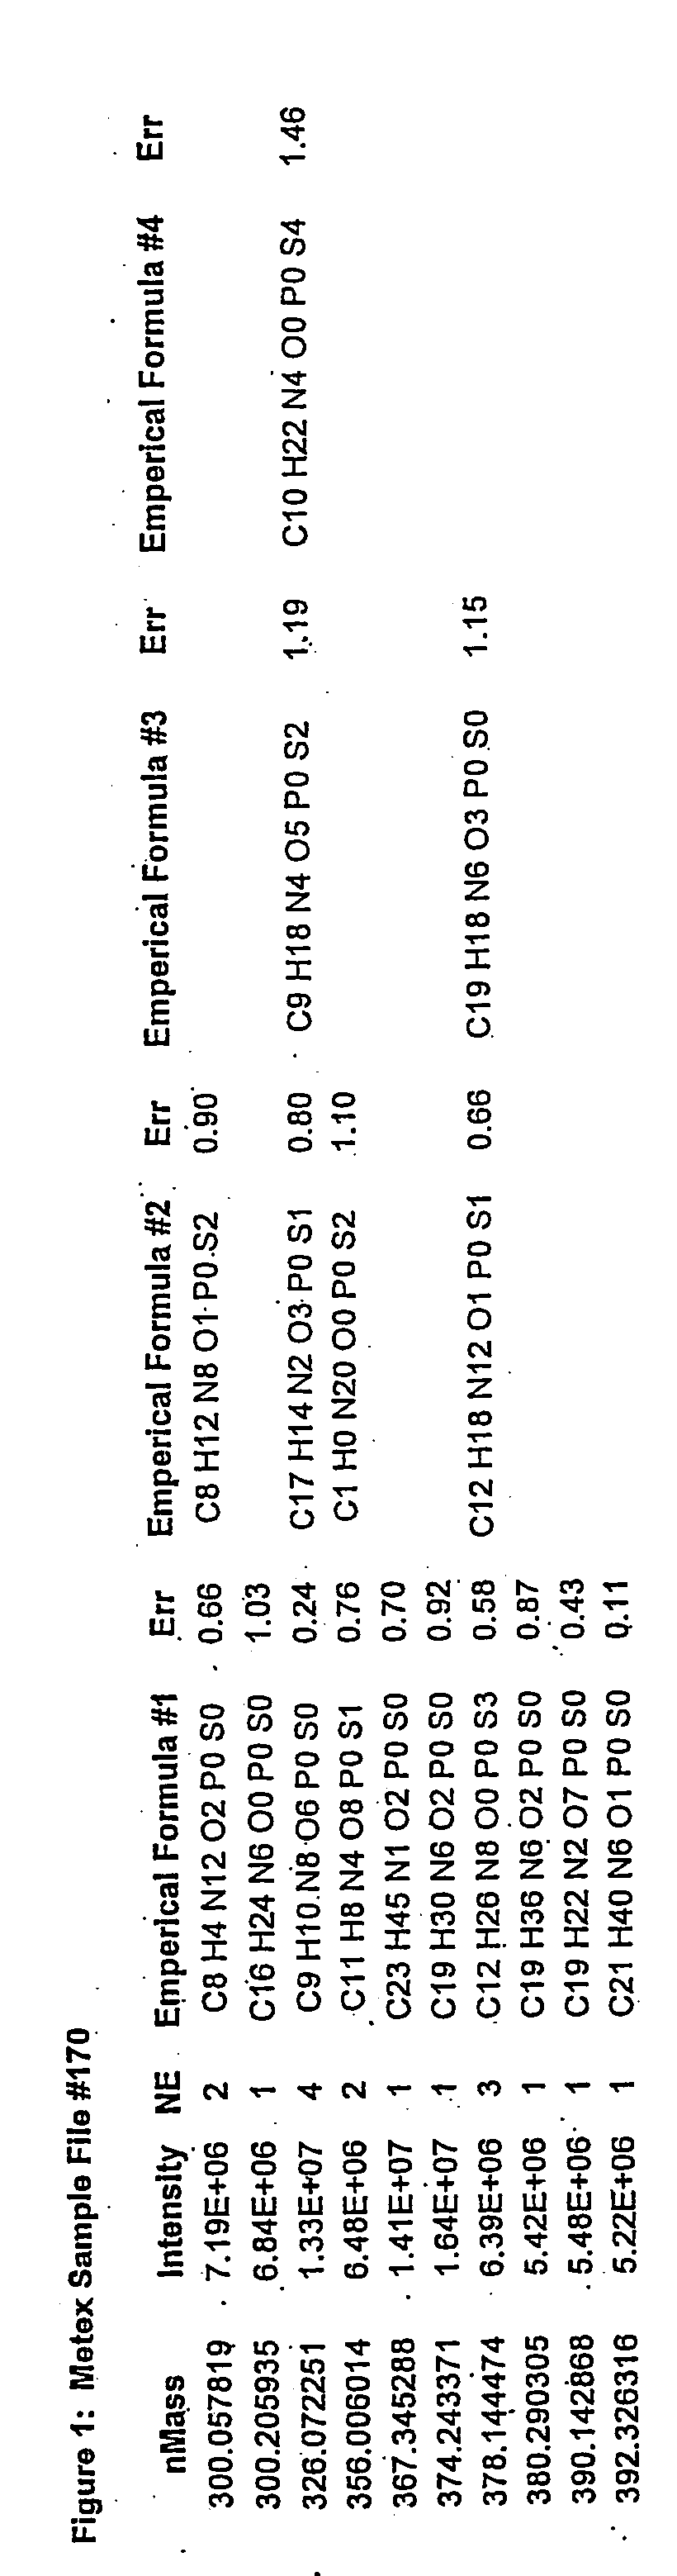 Method of visualizing non-targeted metabolomic data generated from fourier transform ion cyclotron resonance mass spectrometers